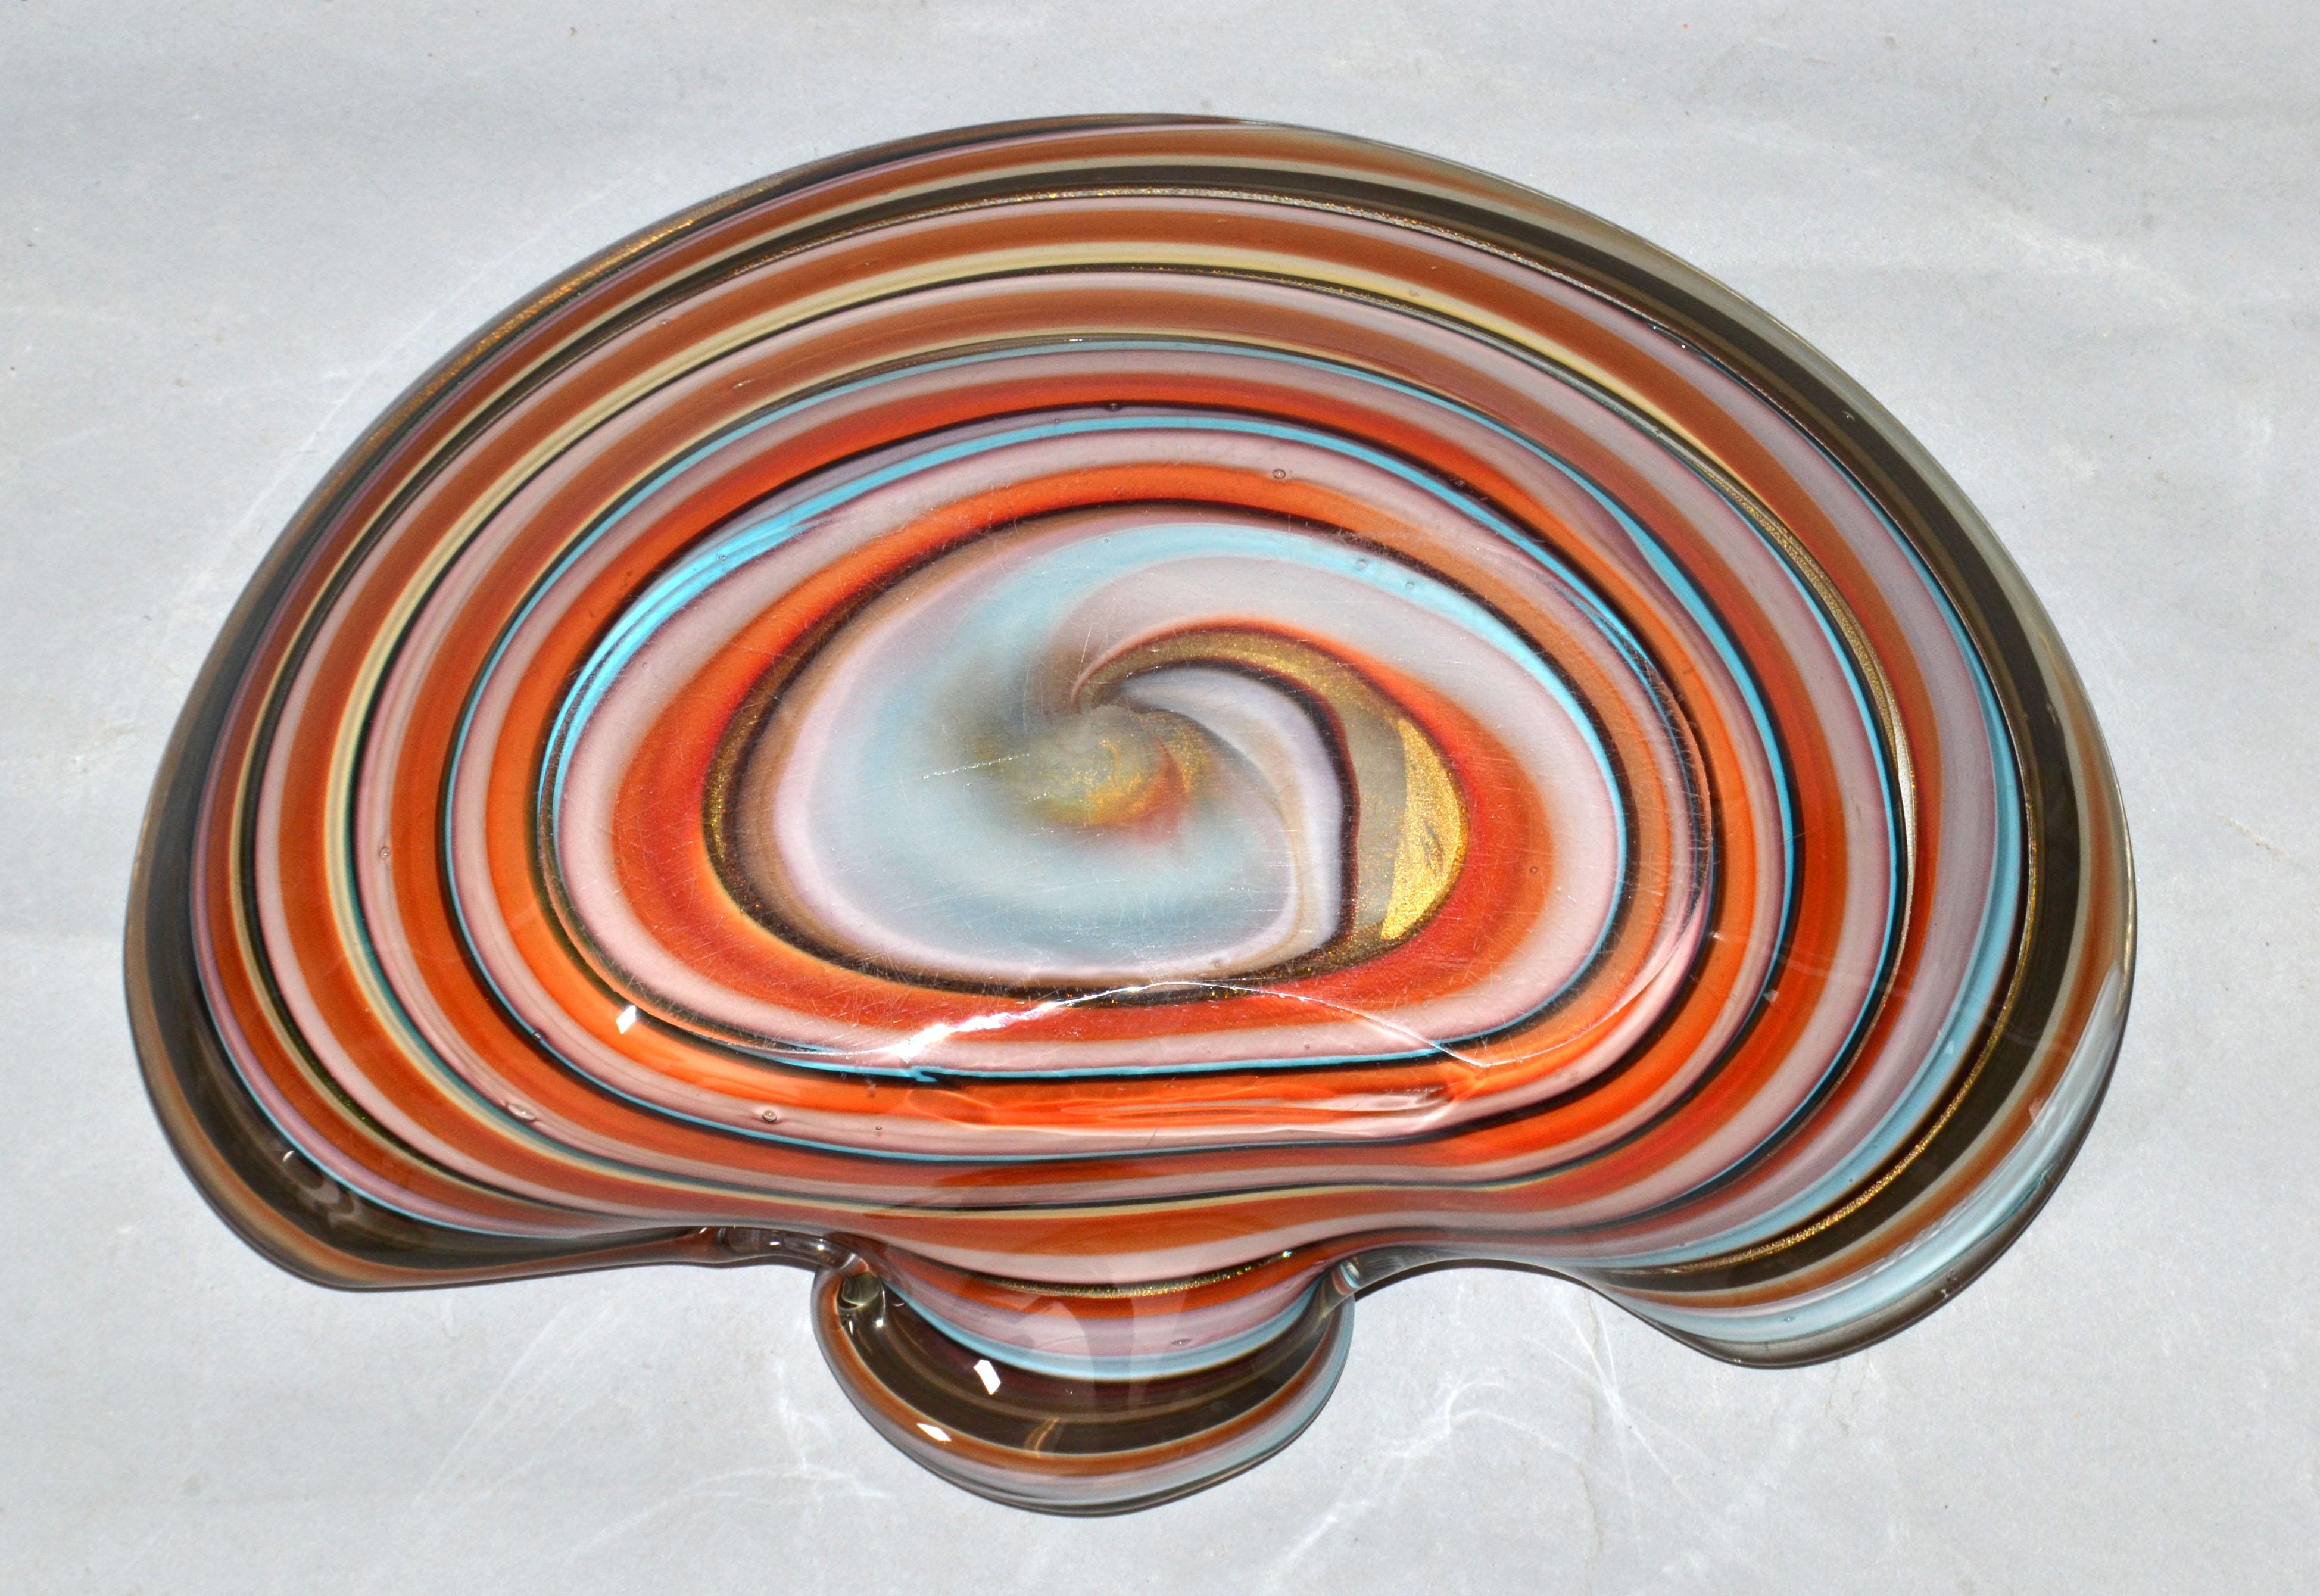 Large Finest Murano Glass Clam Shell Swirl Gold Dust Flecks Bowl, Catchall Italy For Sale 3